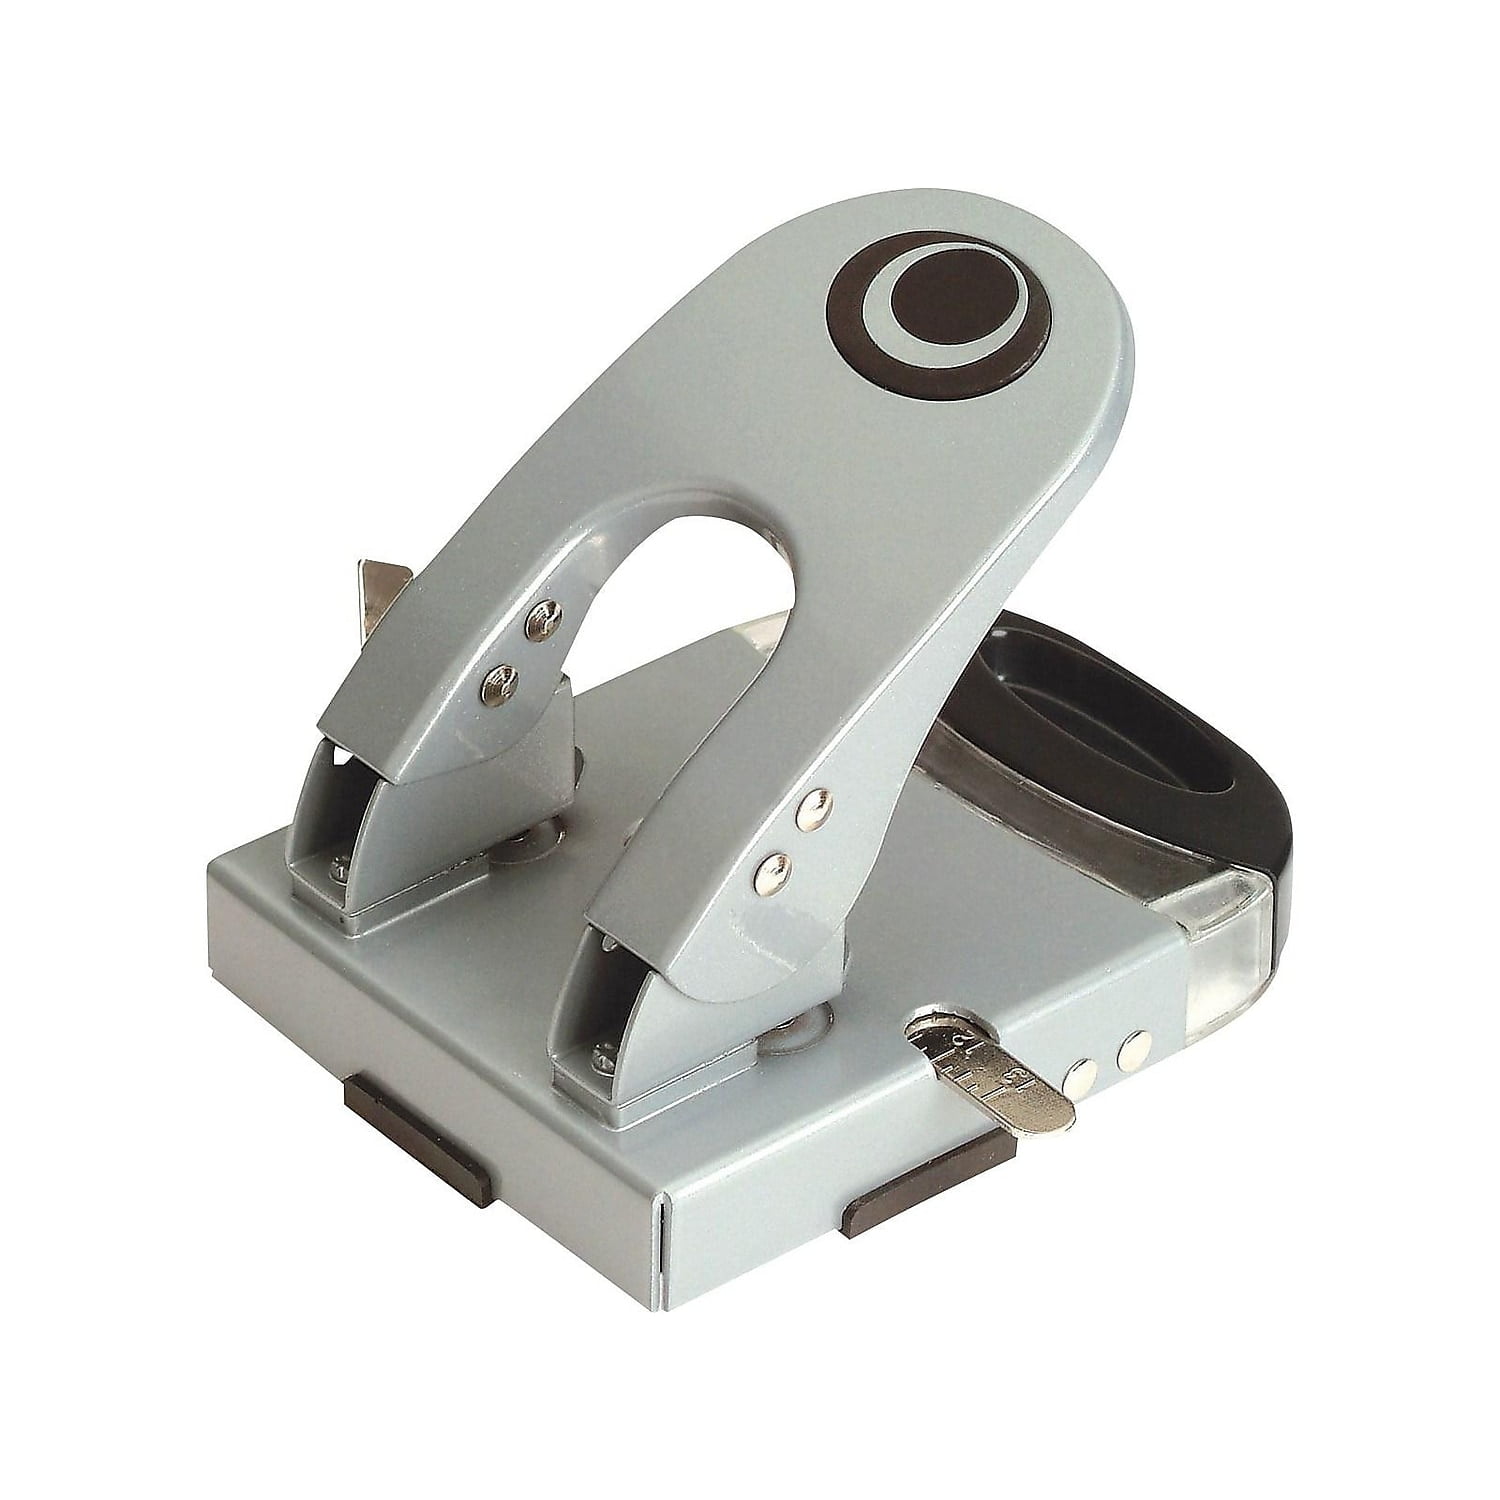 Officemate 1- Hole Punch, 5 Sheet Capacity, Silver (90091)